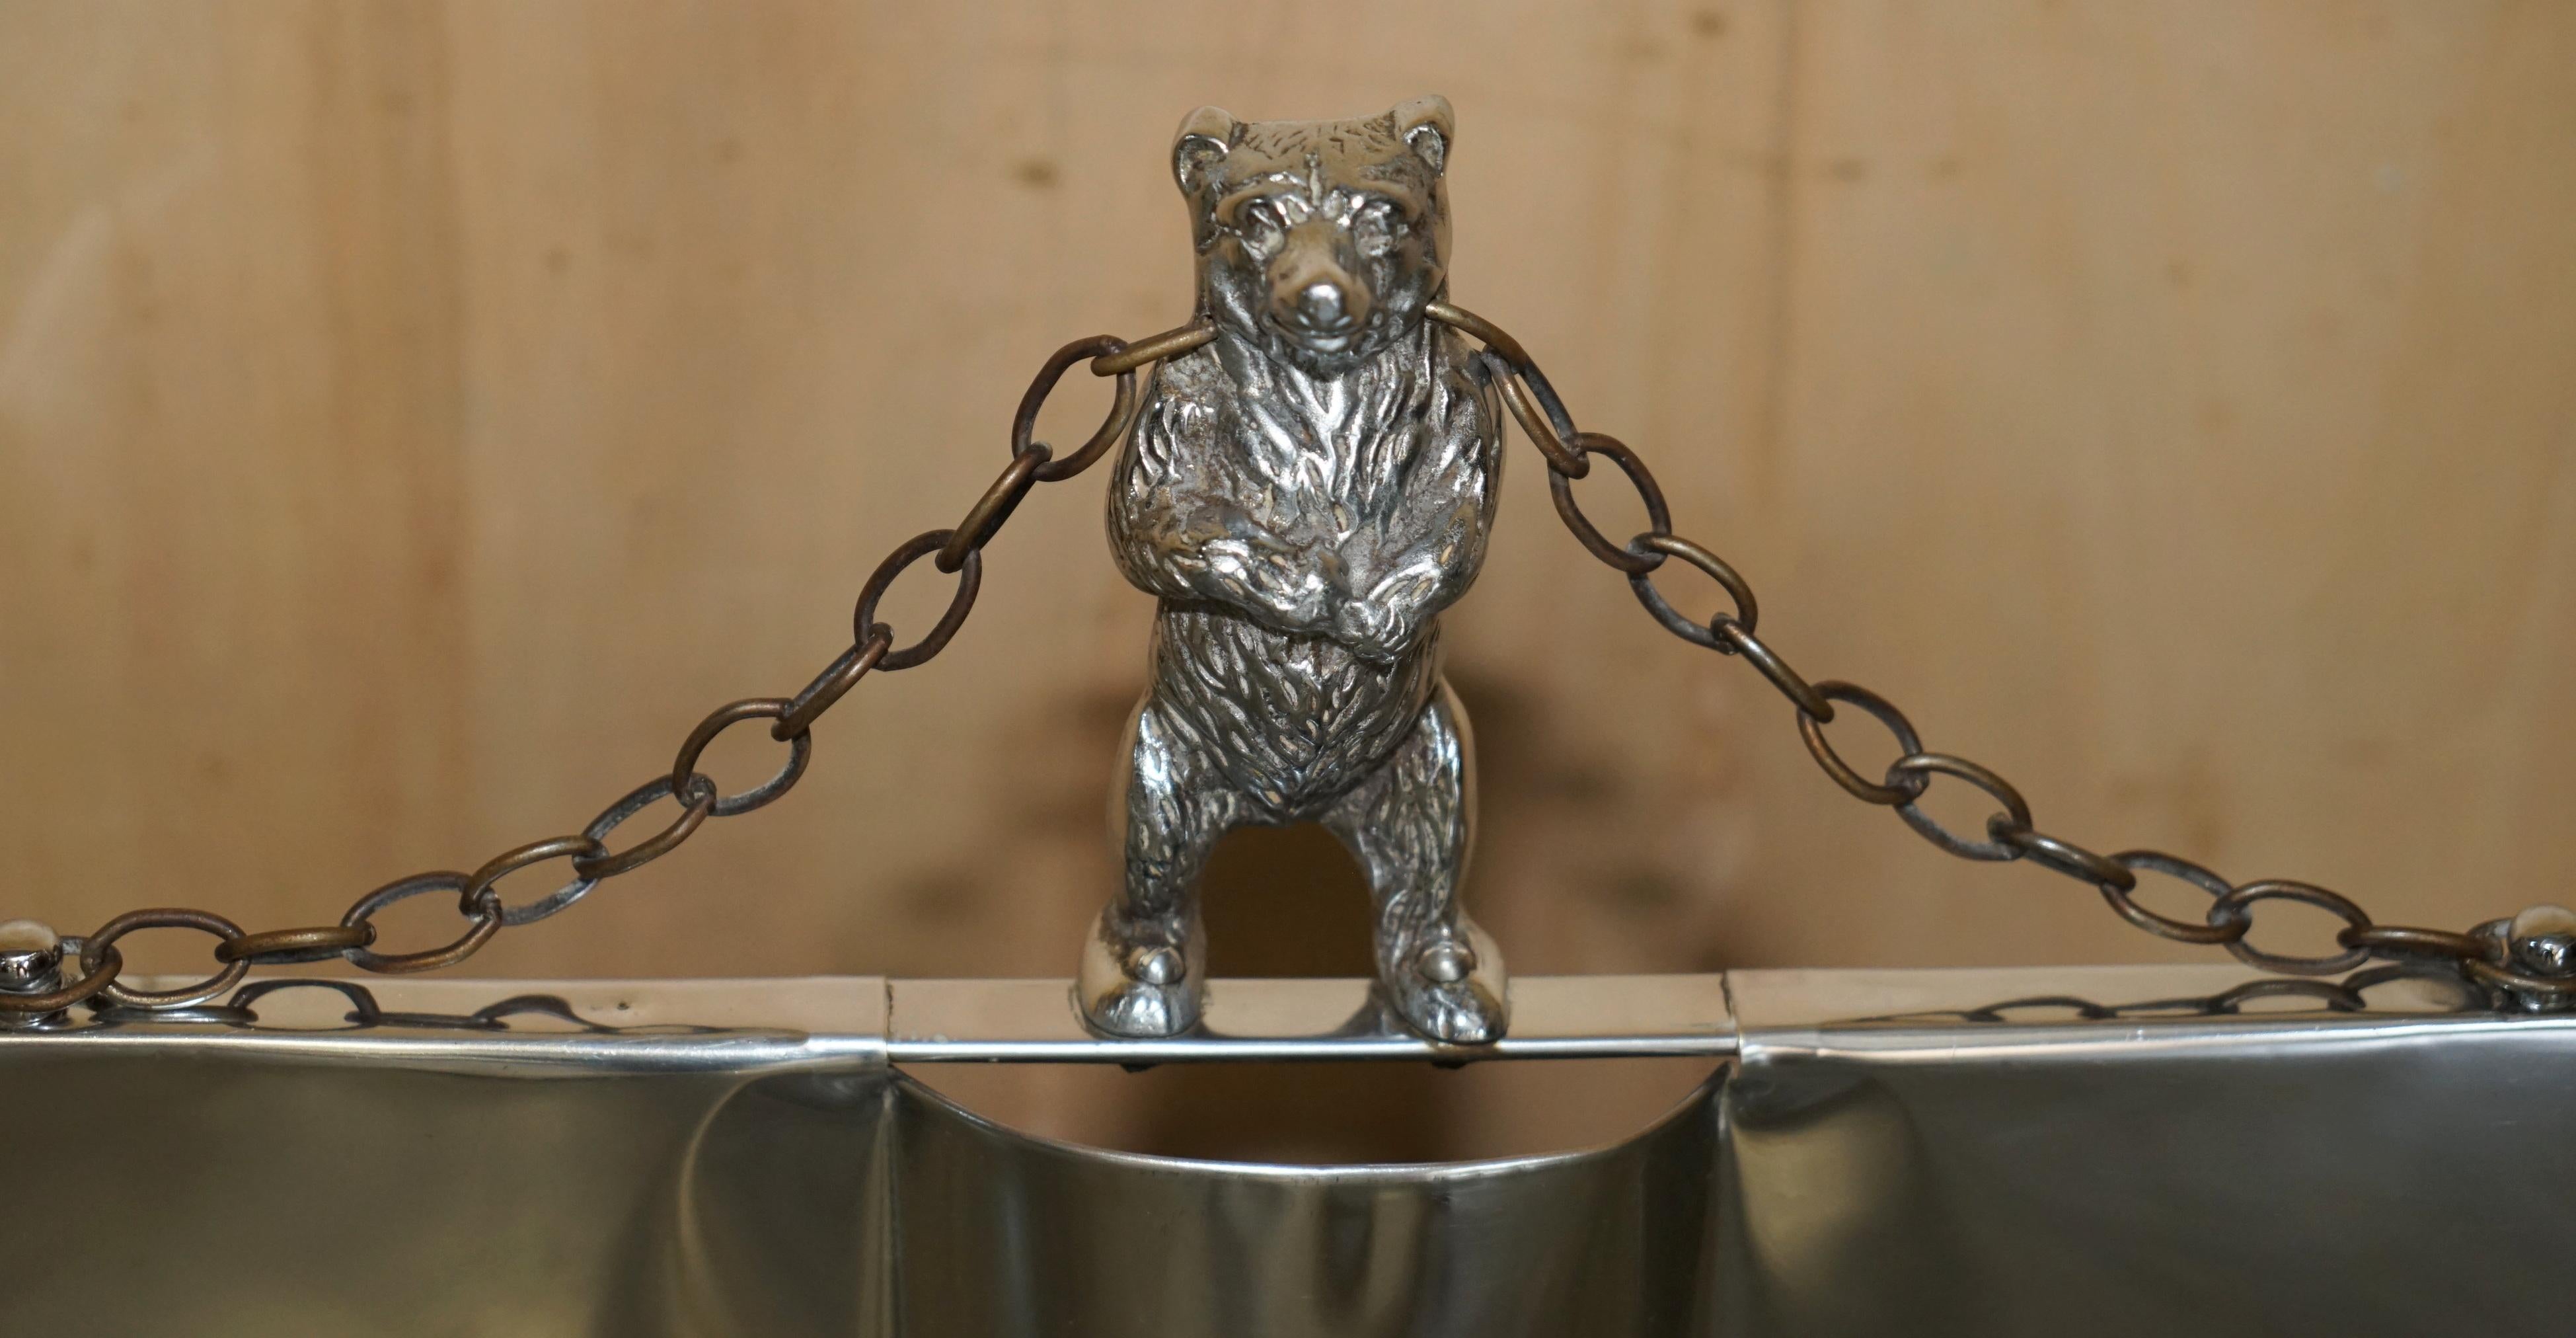 ART DECO ANTiQUE CIRCA 1920er Jahre POLISHED CHROME FIRE GUARD SCREEN WITH BEAR ON TOP (Englisch) im Angebot